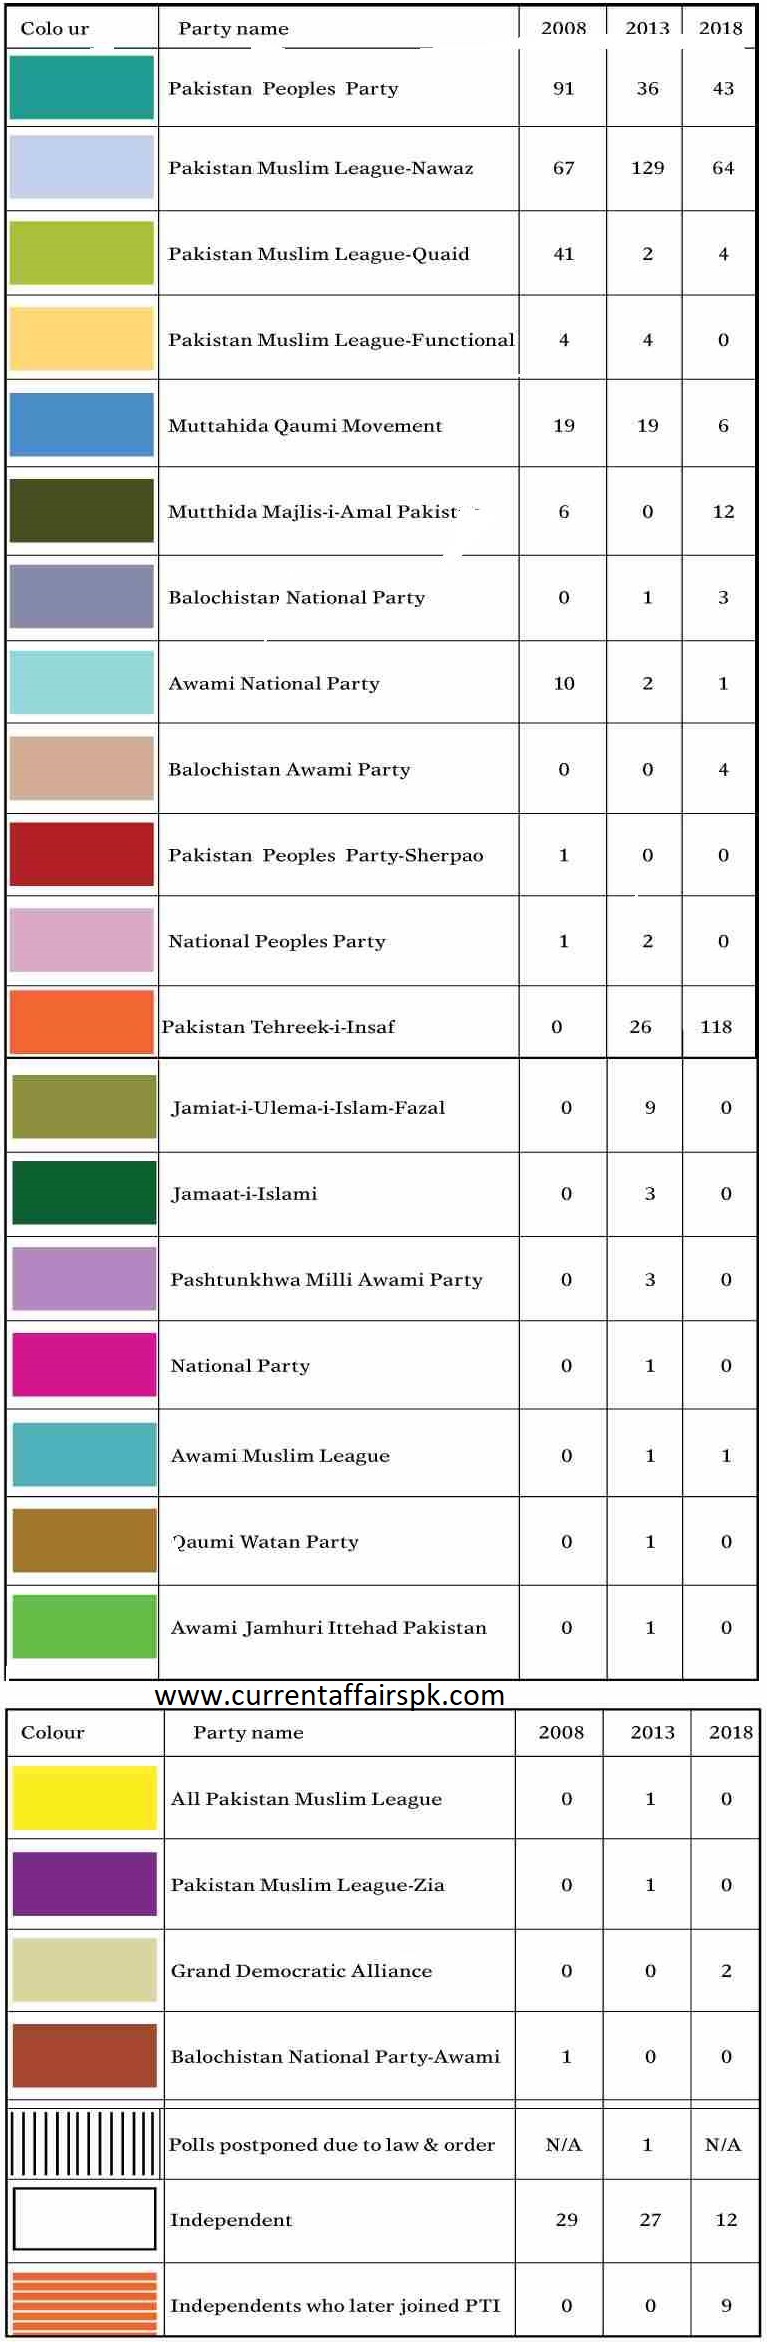 National Assembly of Pakistan Seats Comparison of General Elections of 2008 2013 2018